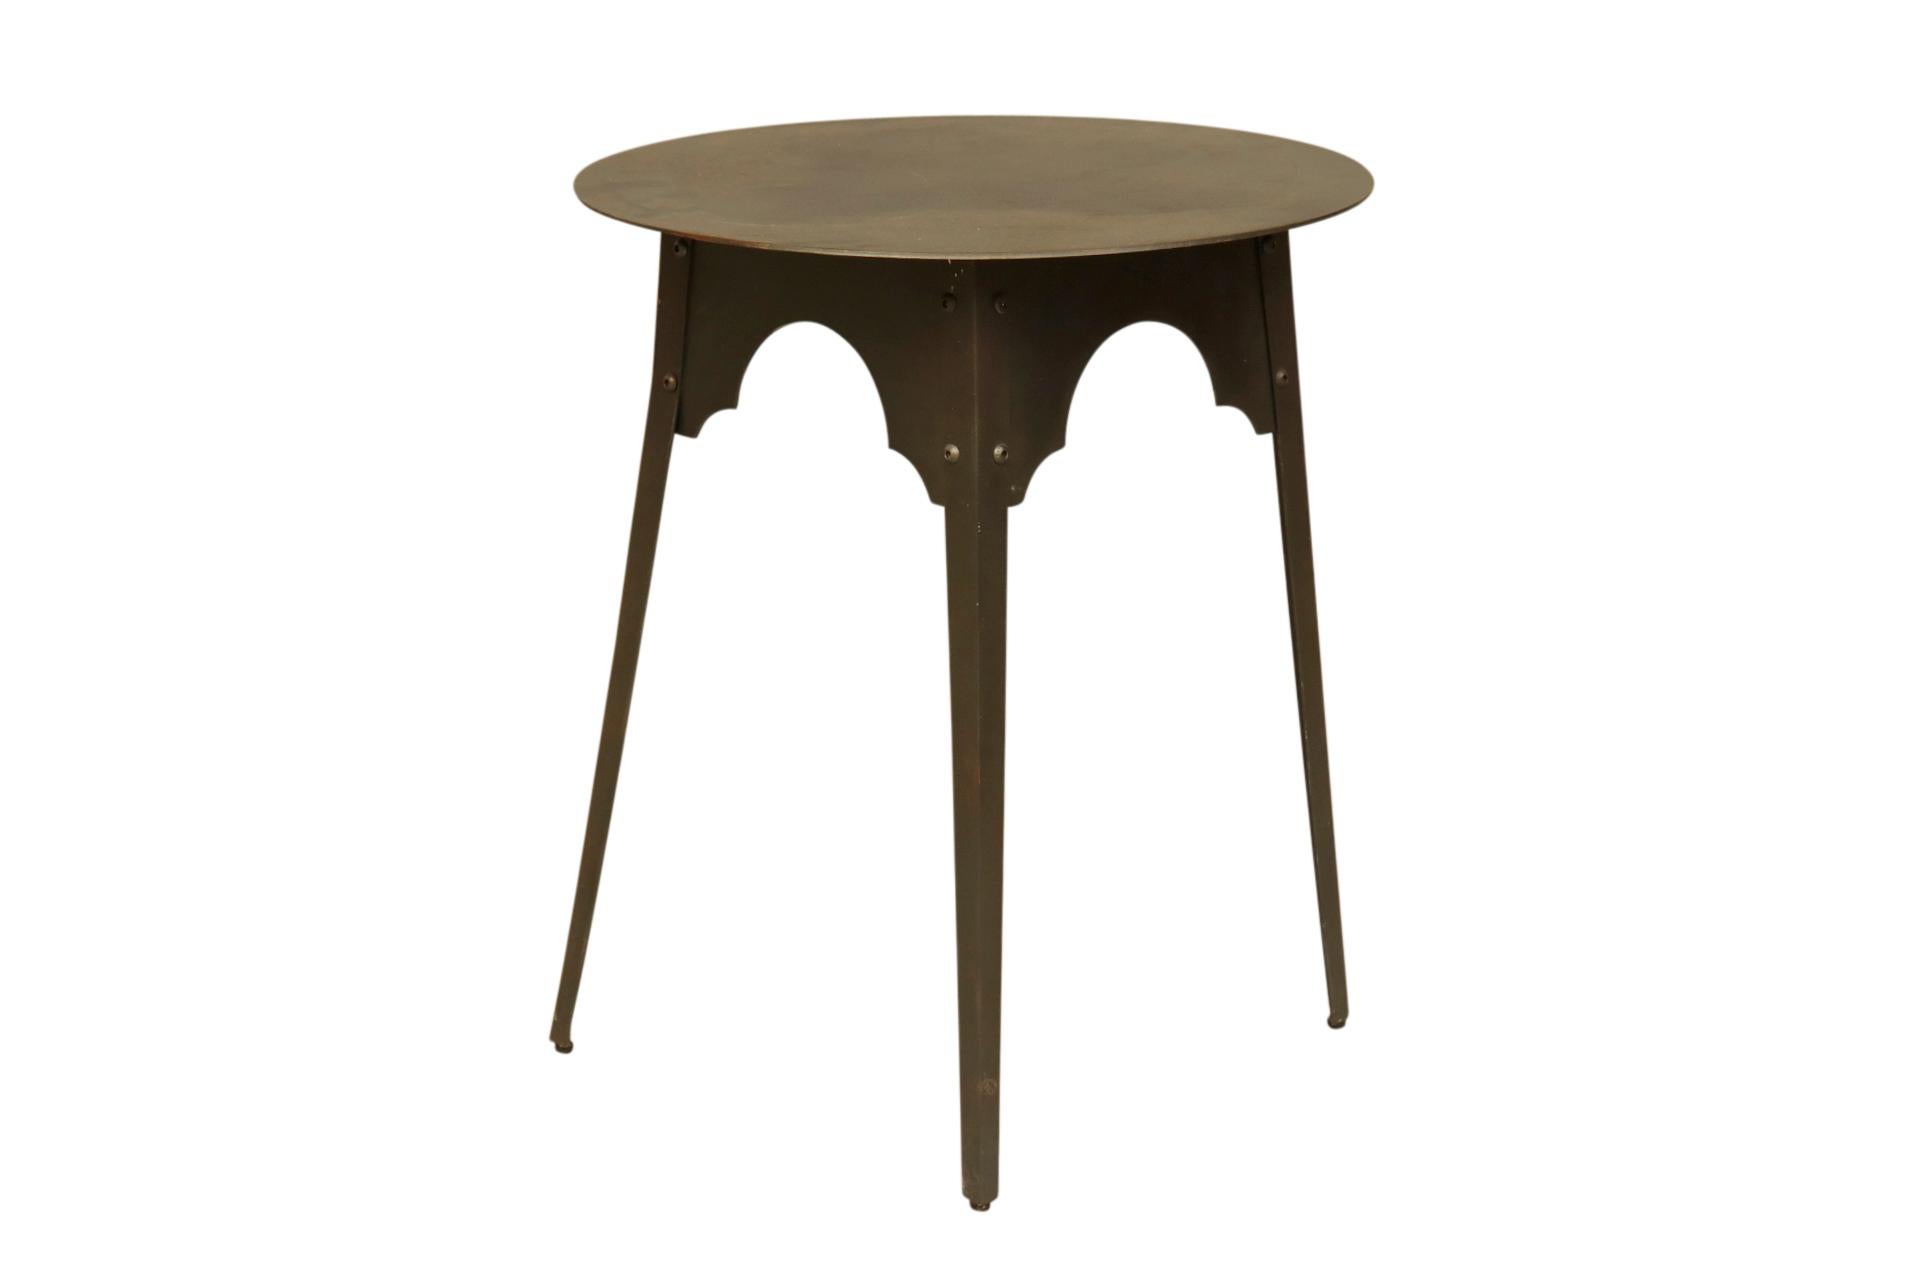 Contemporary steel table.